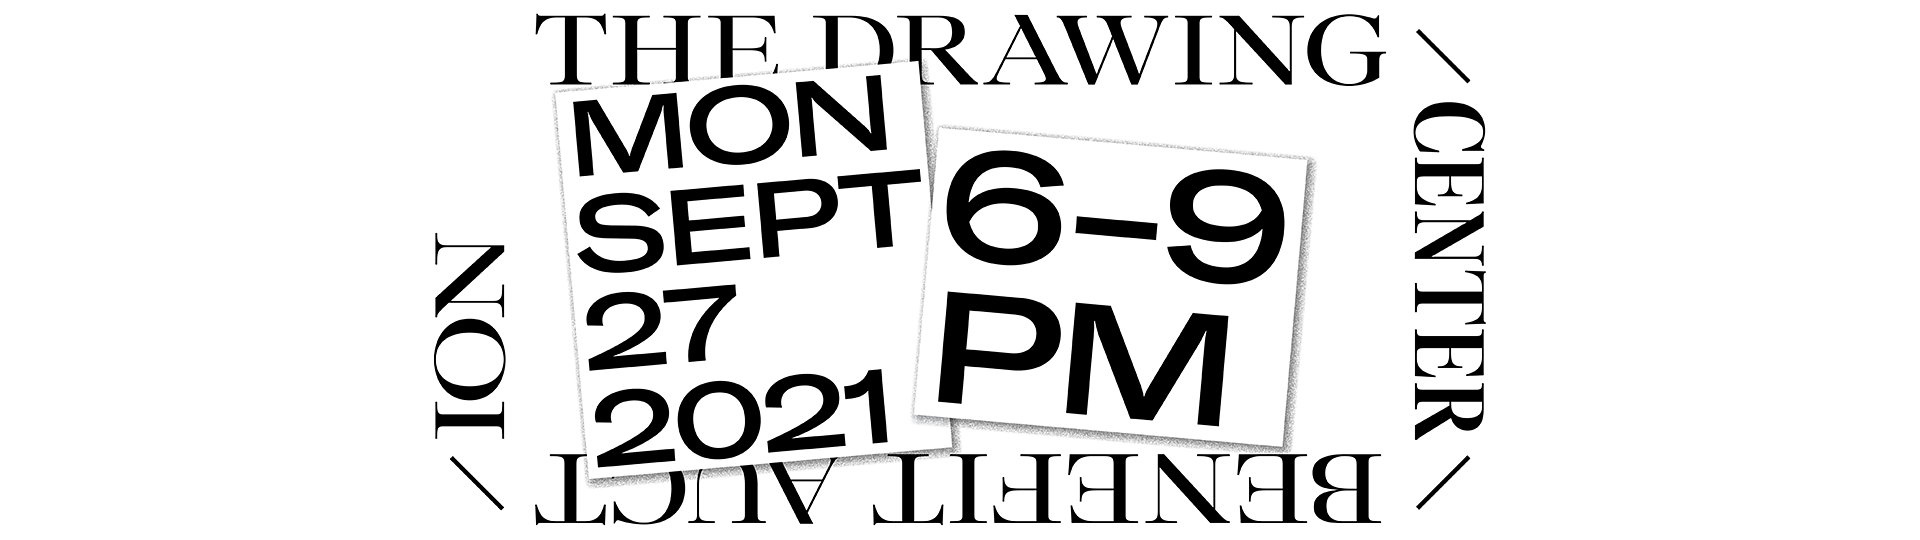 The Drawing Center 2021 Benefit Auction by The Drawing Center